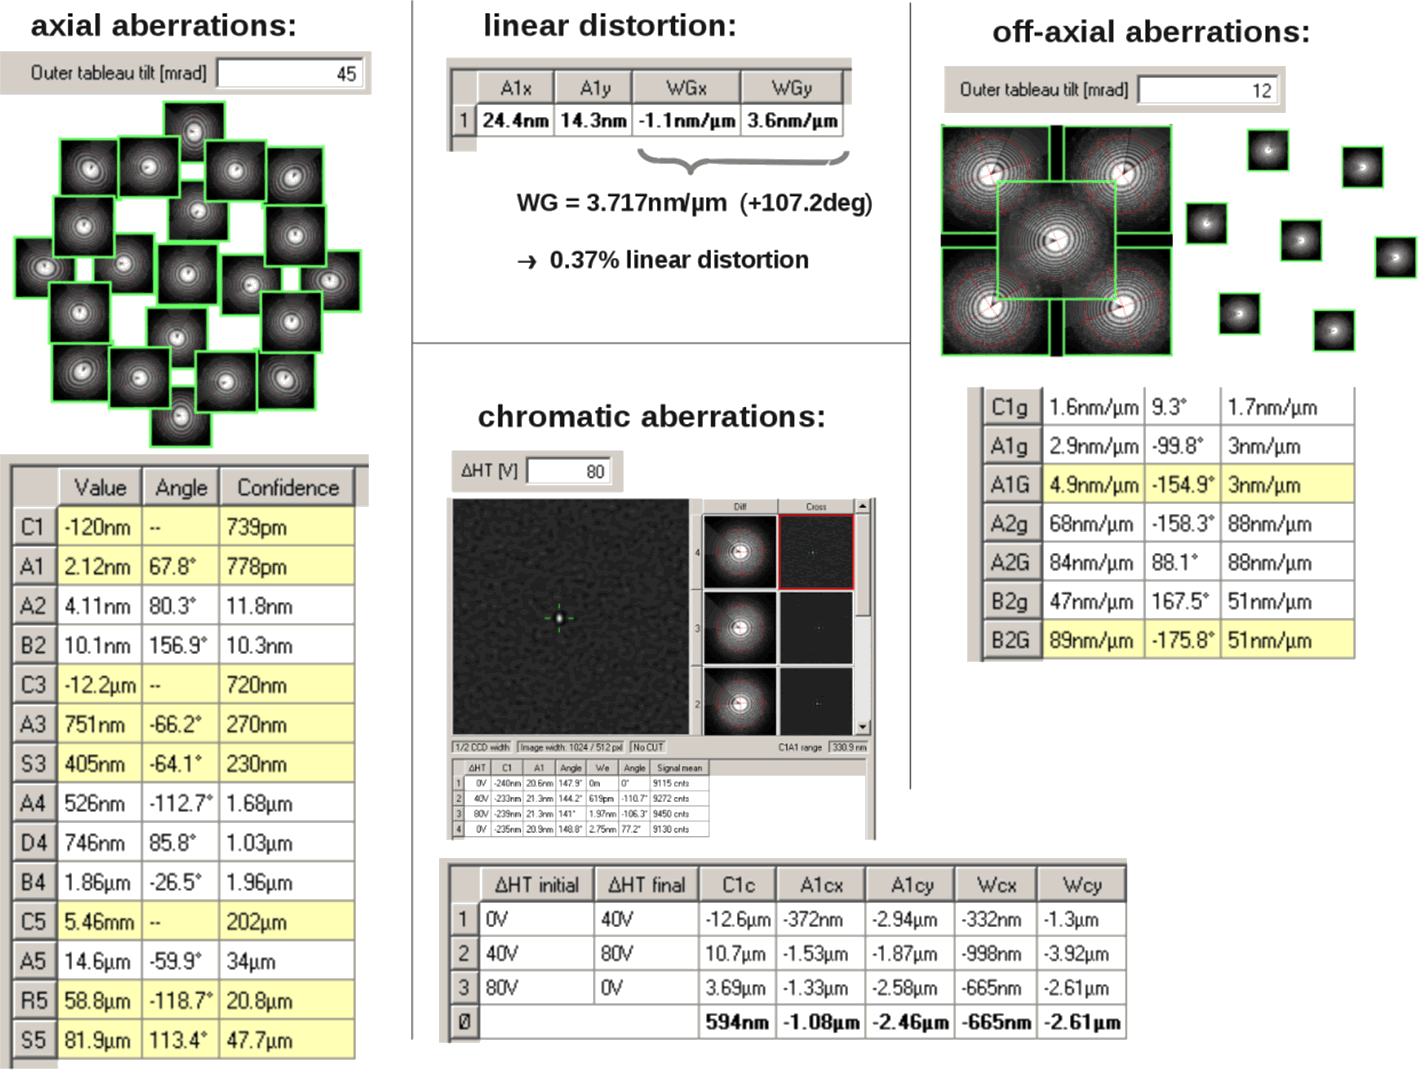 Screenshots from aberration measurement for the SALVE II microscope